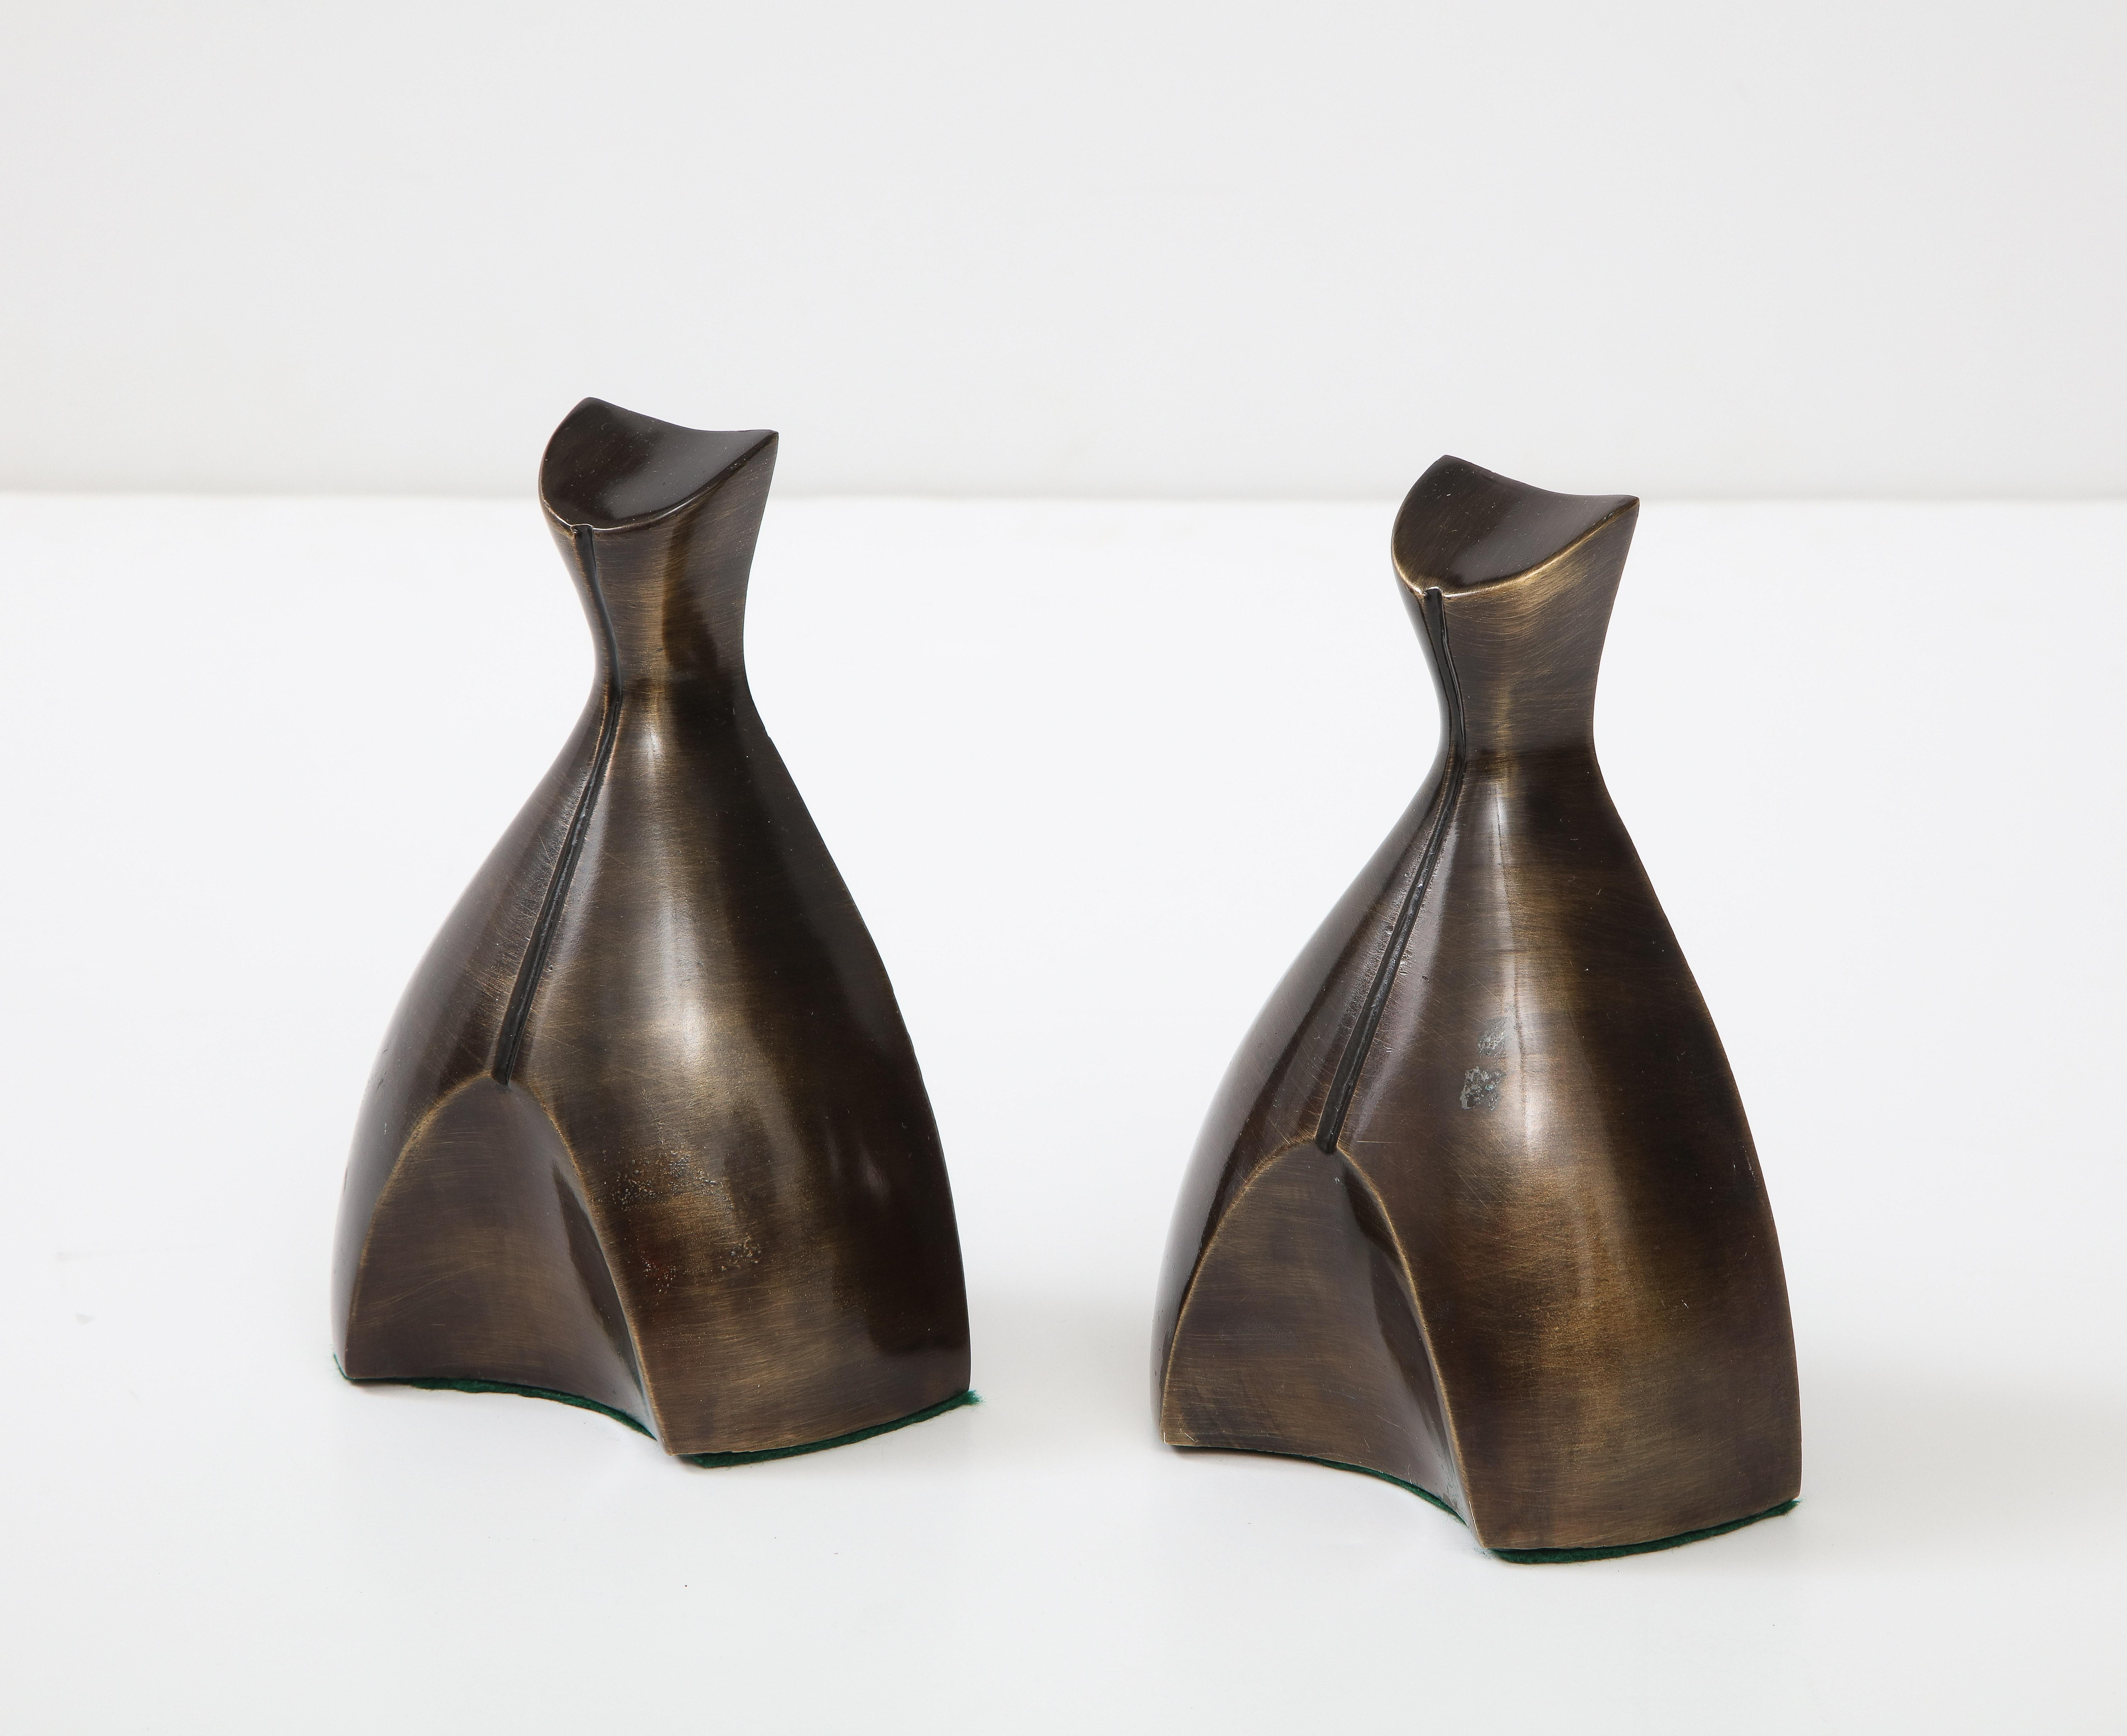 Pair of Modernist custom finished bronze bookends by Ben Sibel, c60s.